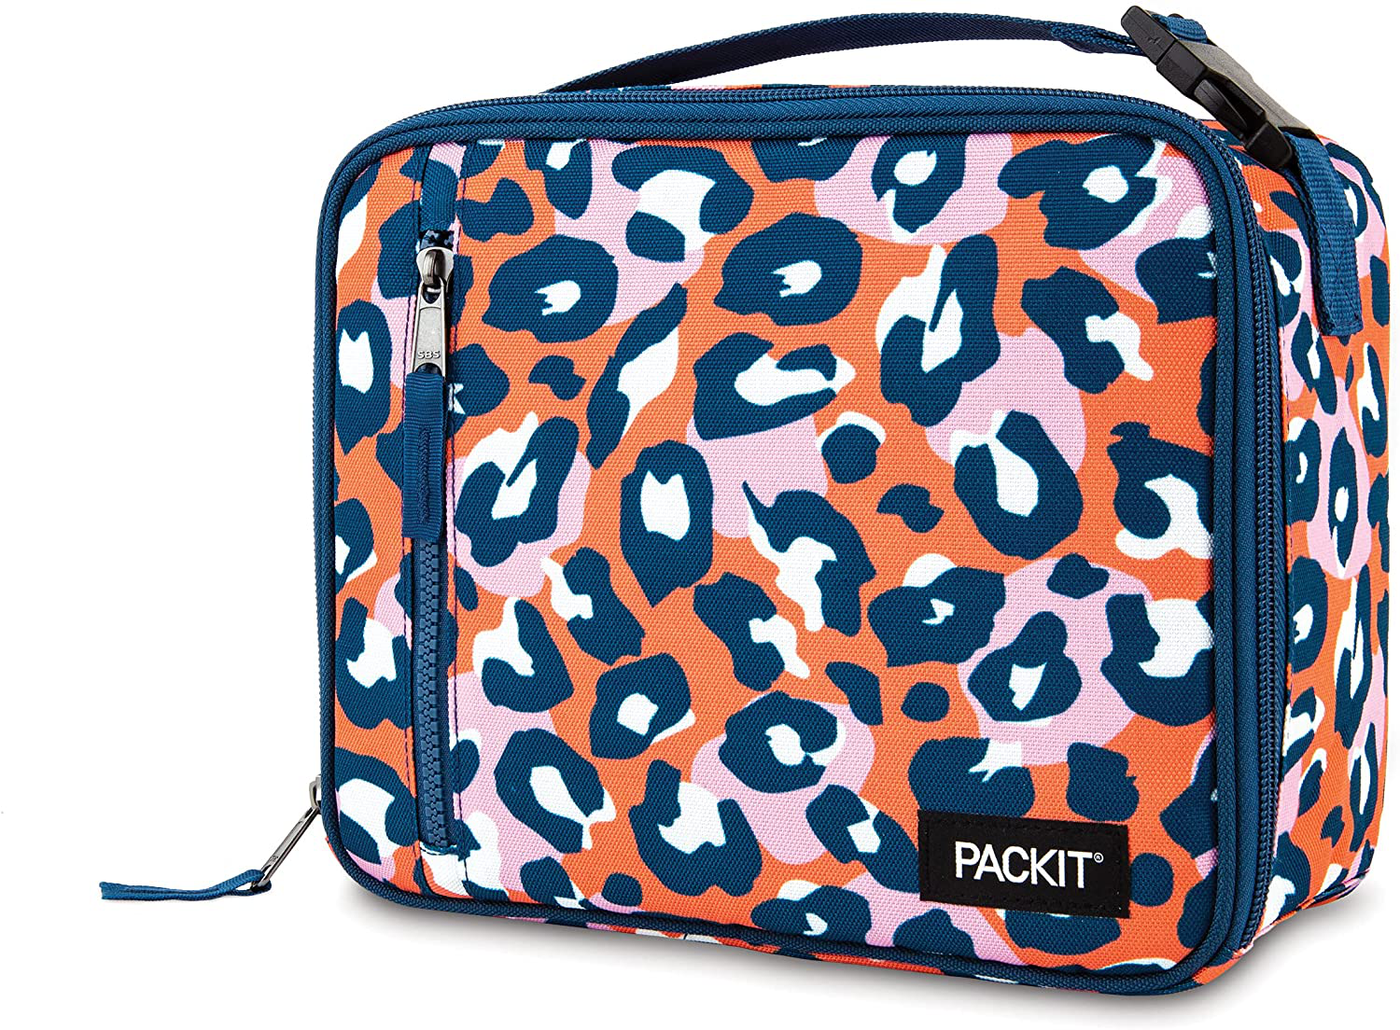 PackIt Freezable Classic Lunch Box, Wild Leopard Orange